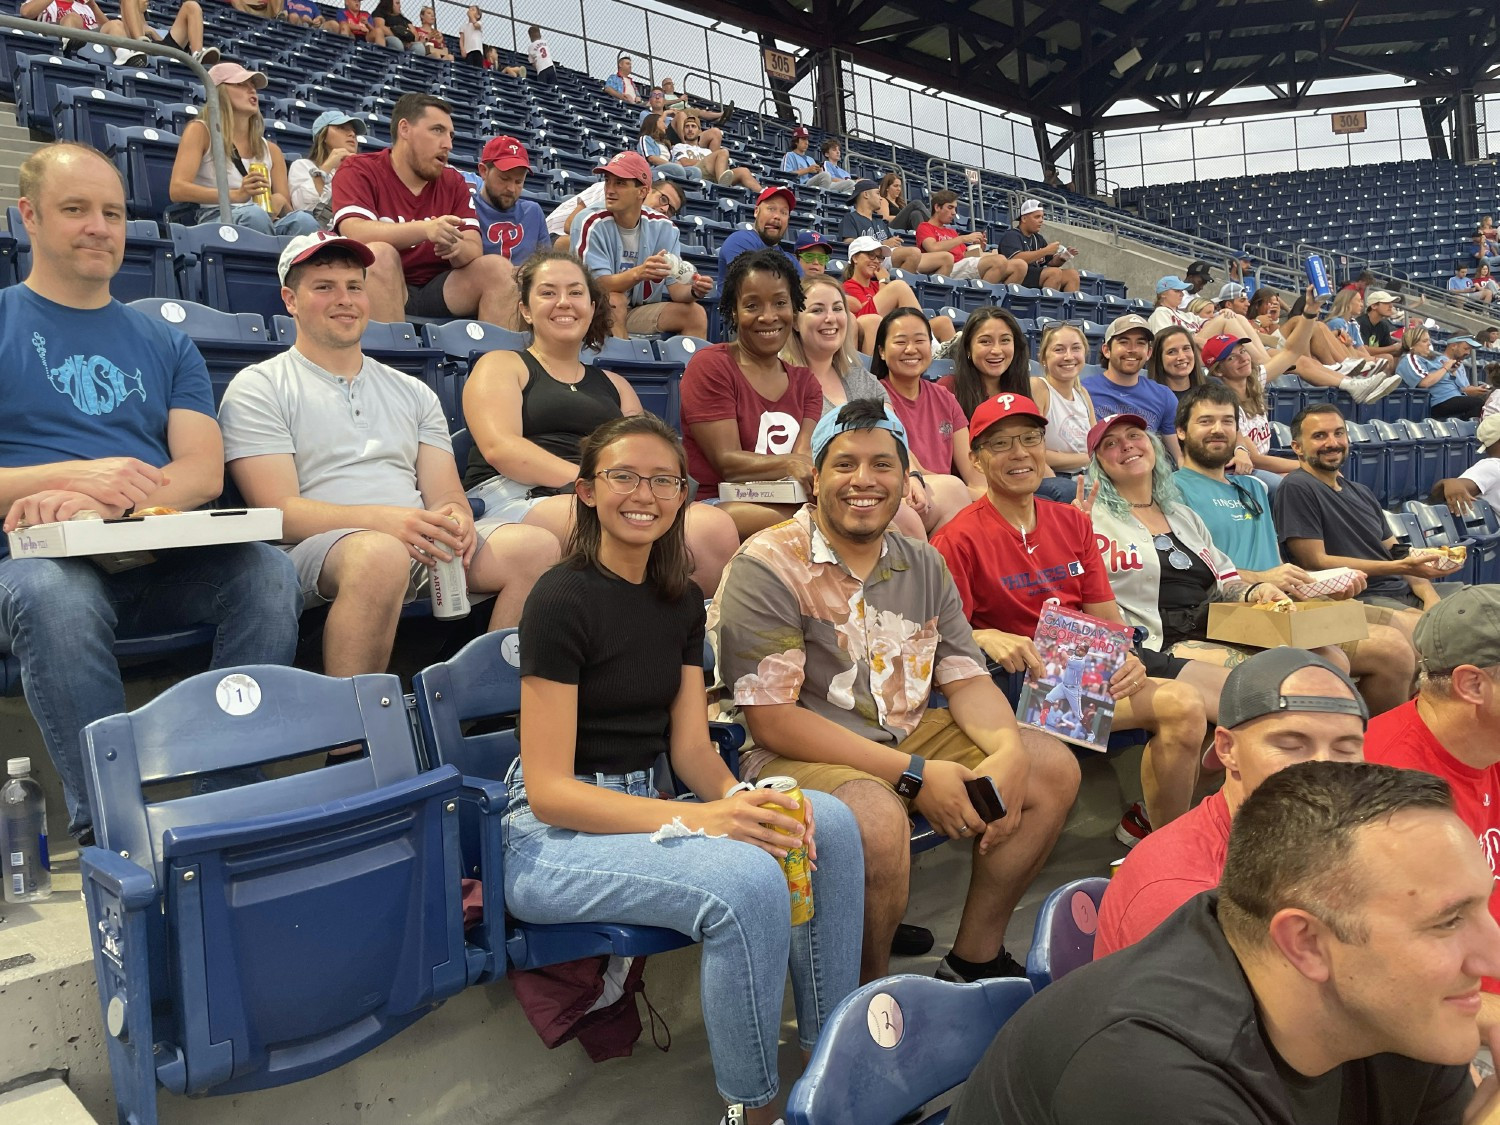 Cabaletta Crew members attending a Phillies baseball game outing.